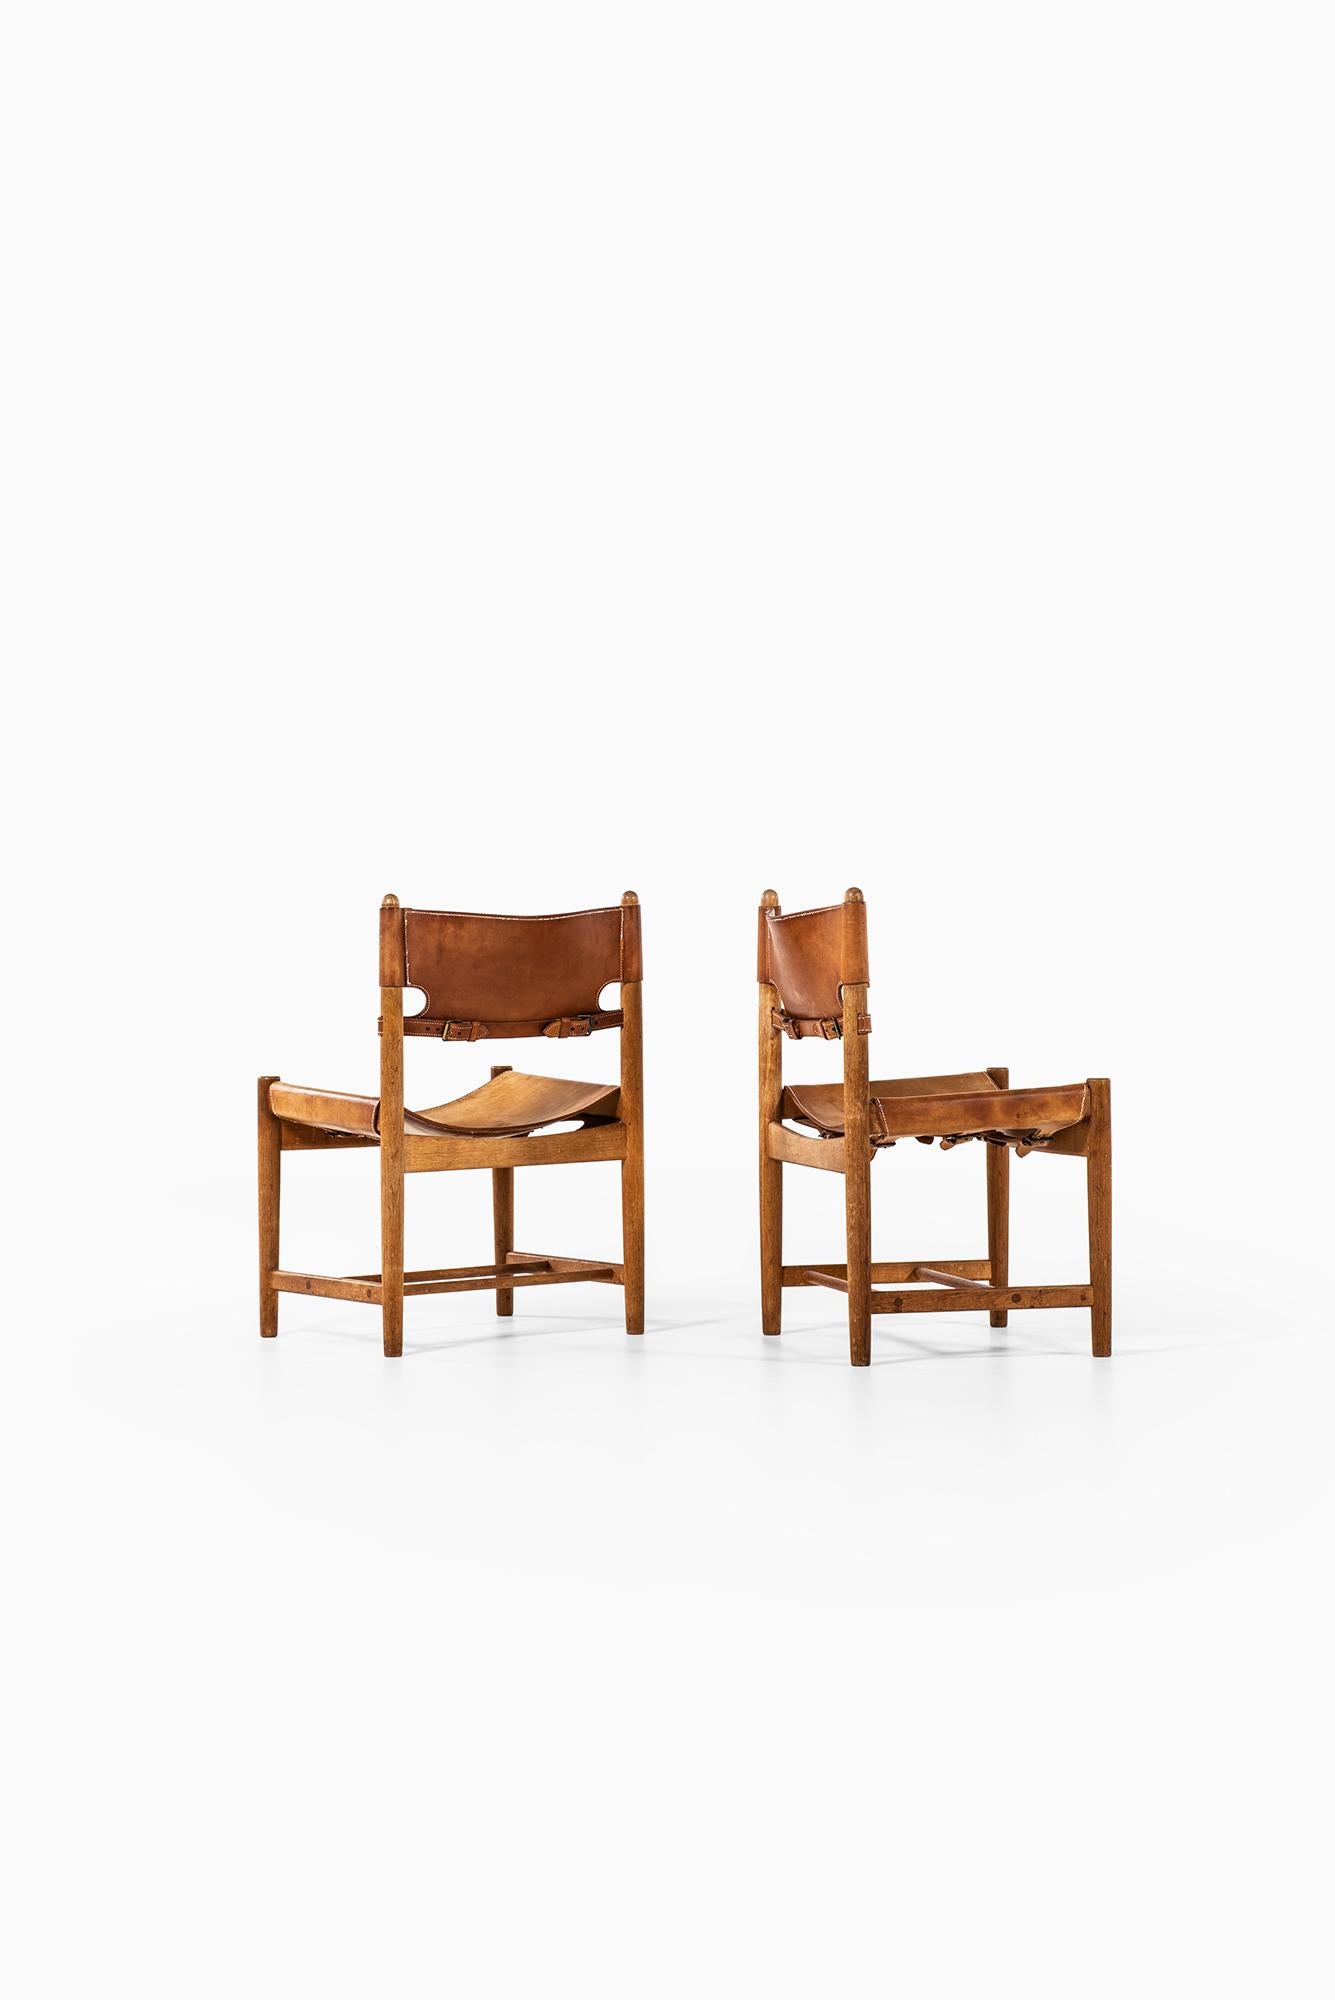 Leather Børge Mogensen Dining Chairs Model 3237 by Fredericia Stolefabrik in Denmark